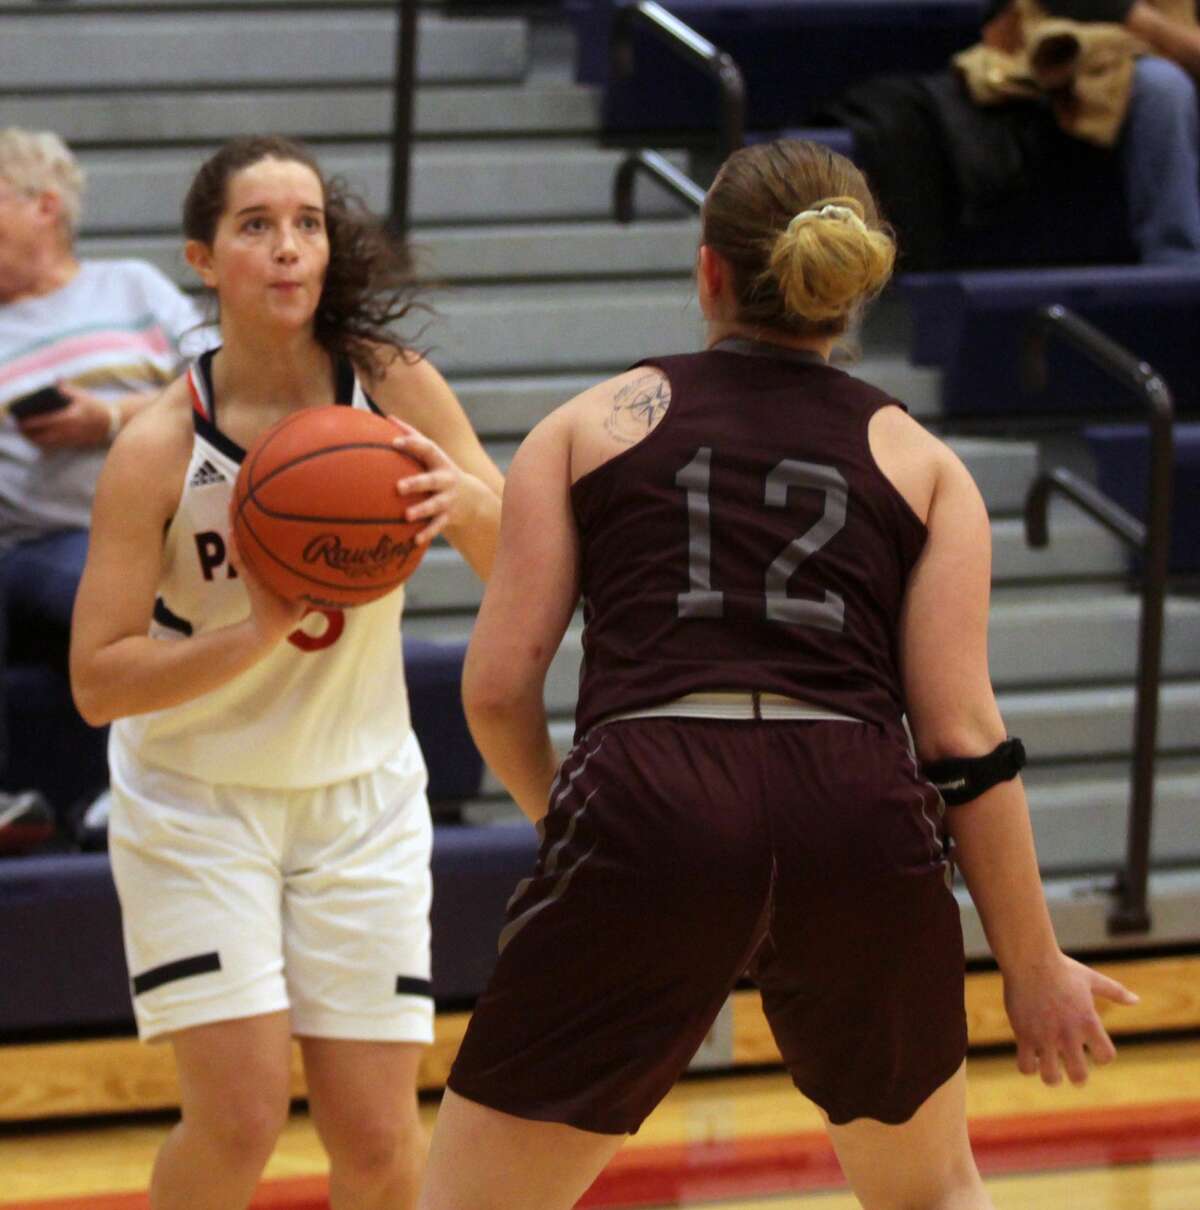 The USA girls basketball team capped off a remarkable second-half comeback with a 48-24 victory over Cass City on Tuesday night.